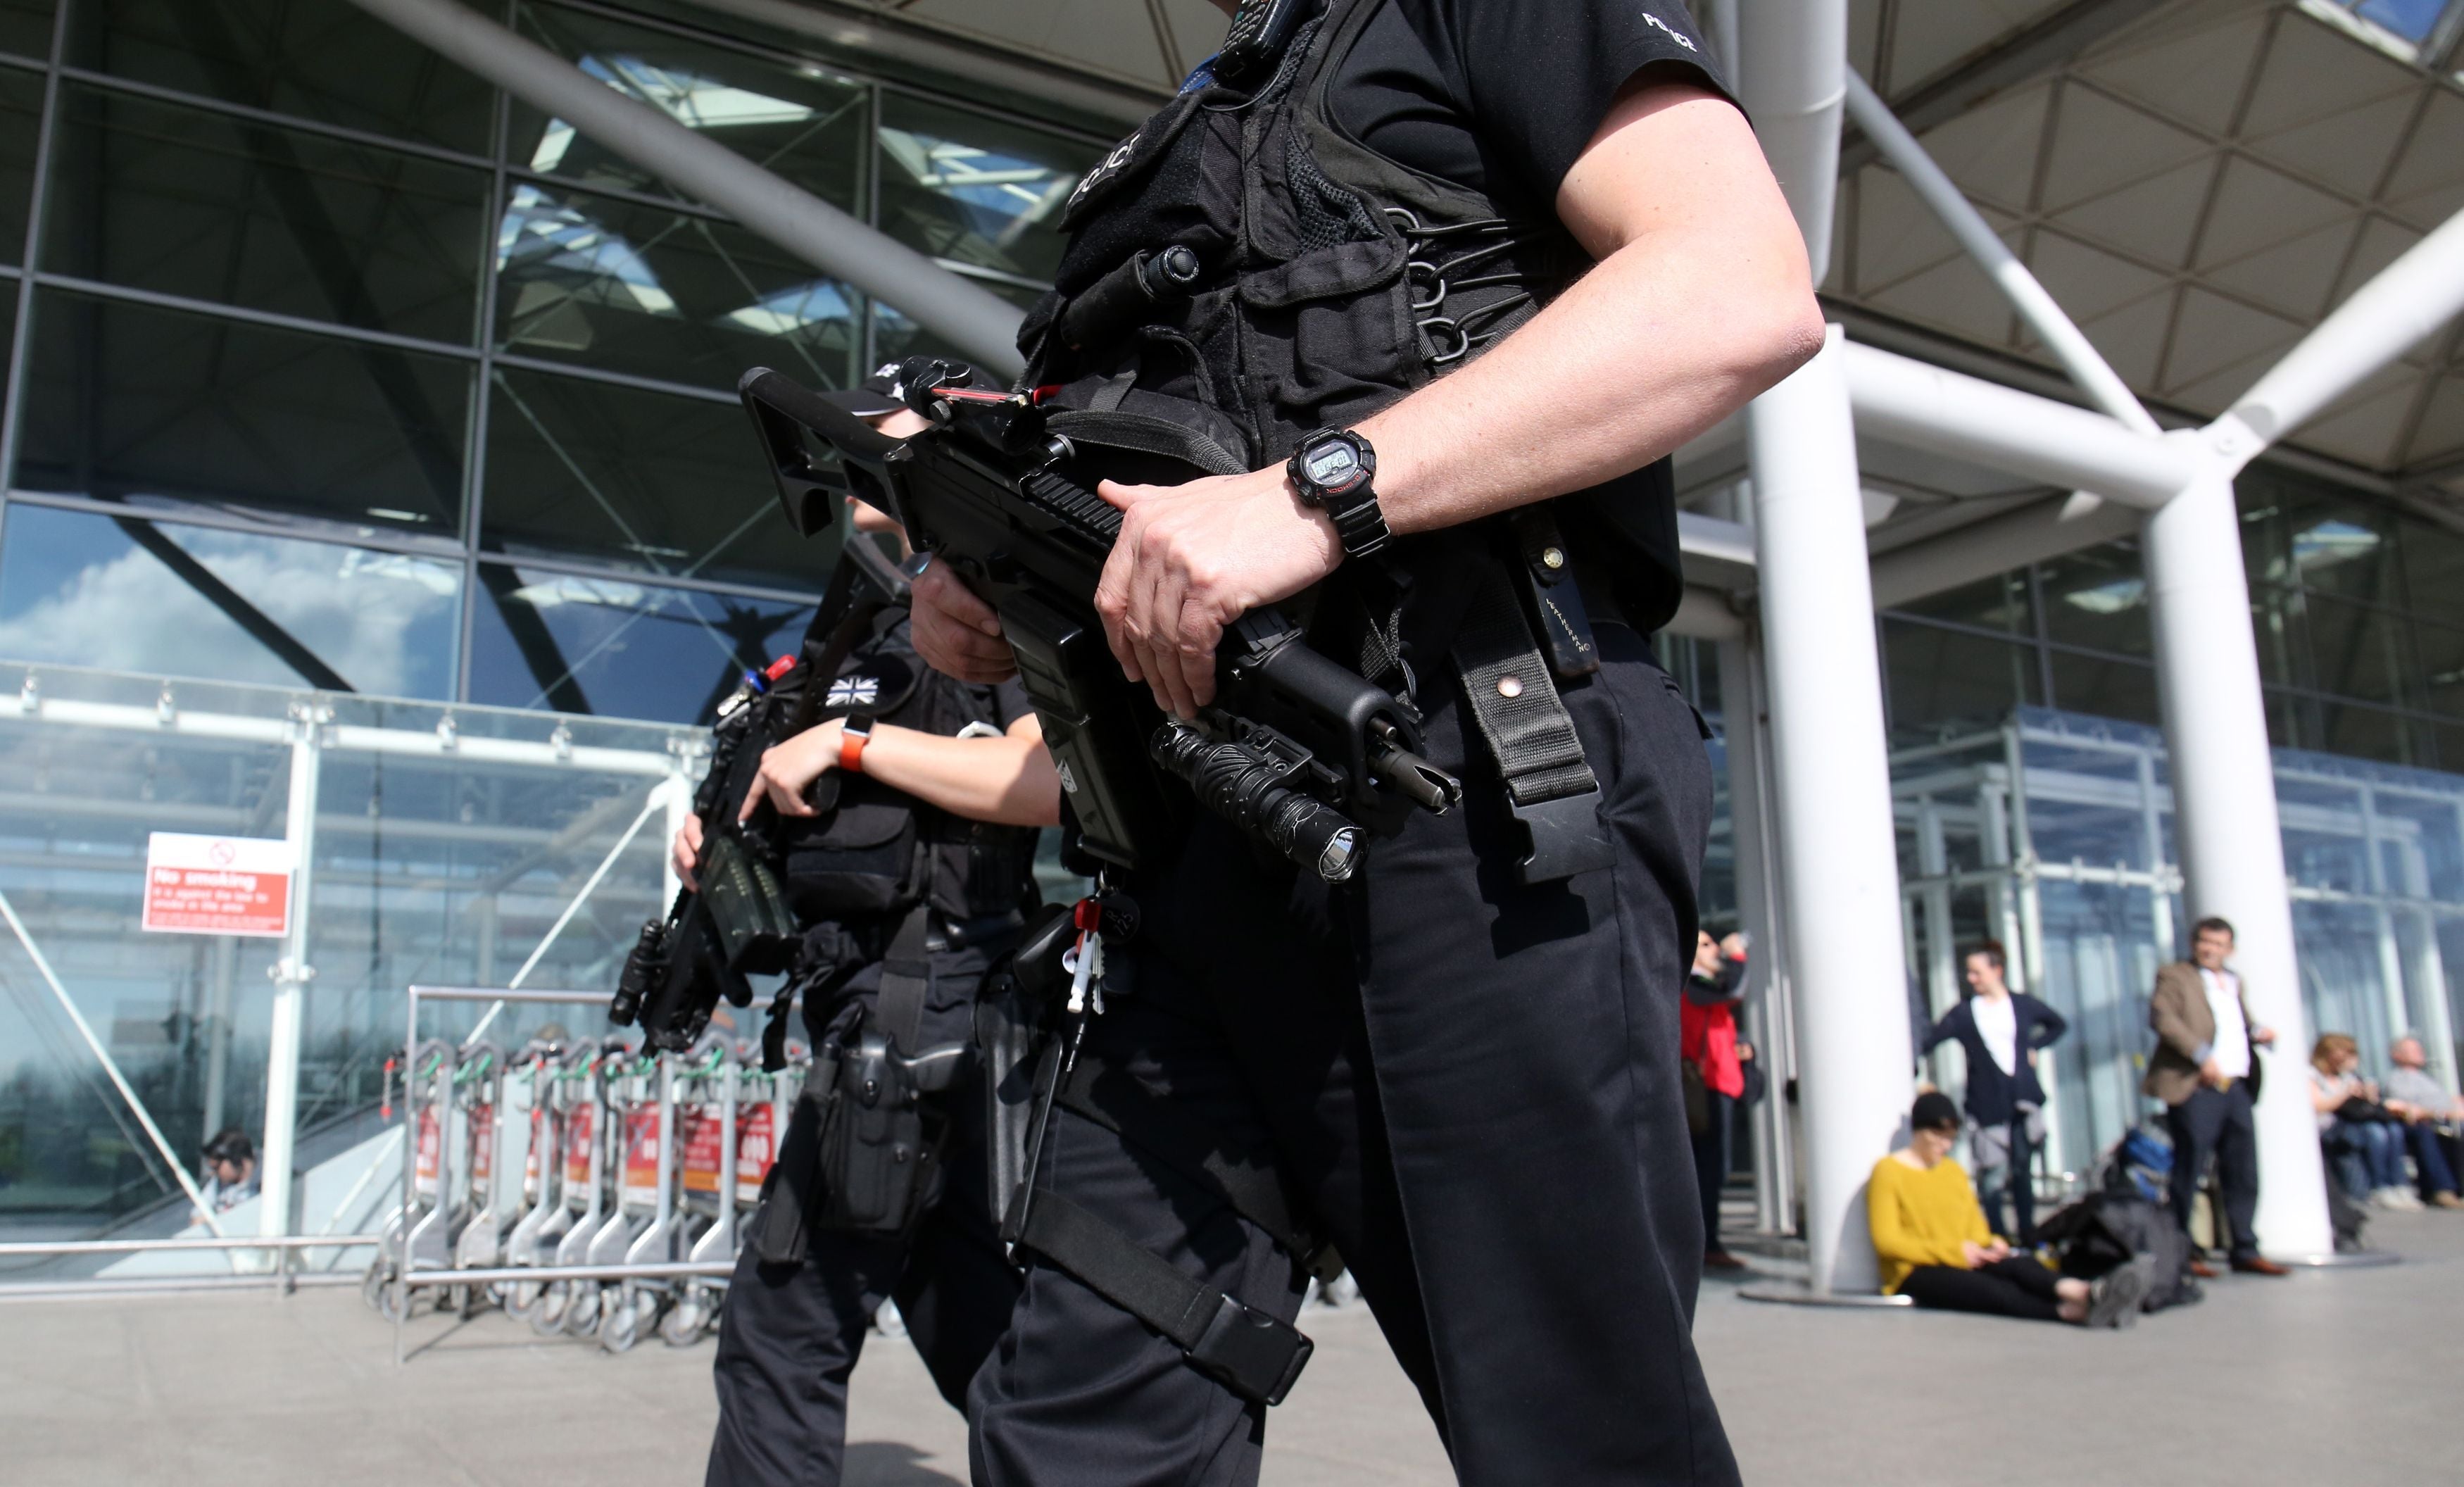 Police officers are not routinely armed in England and Wales